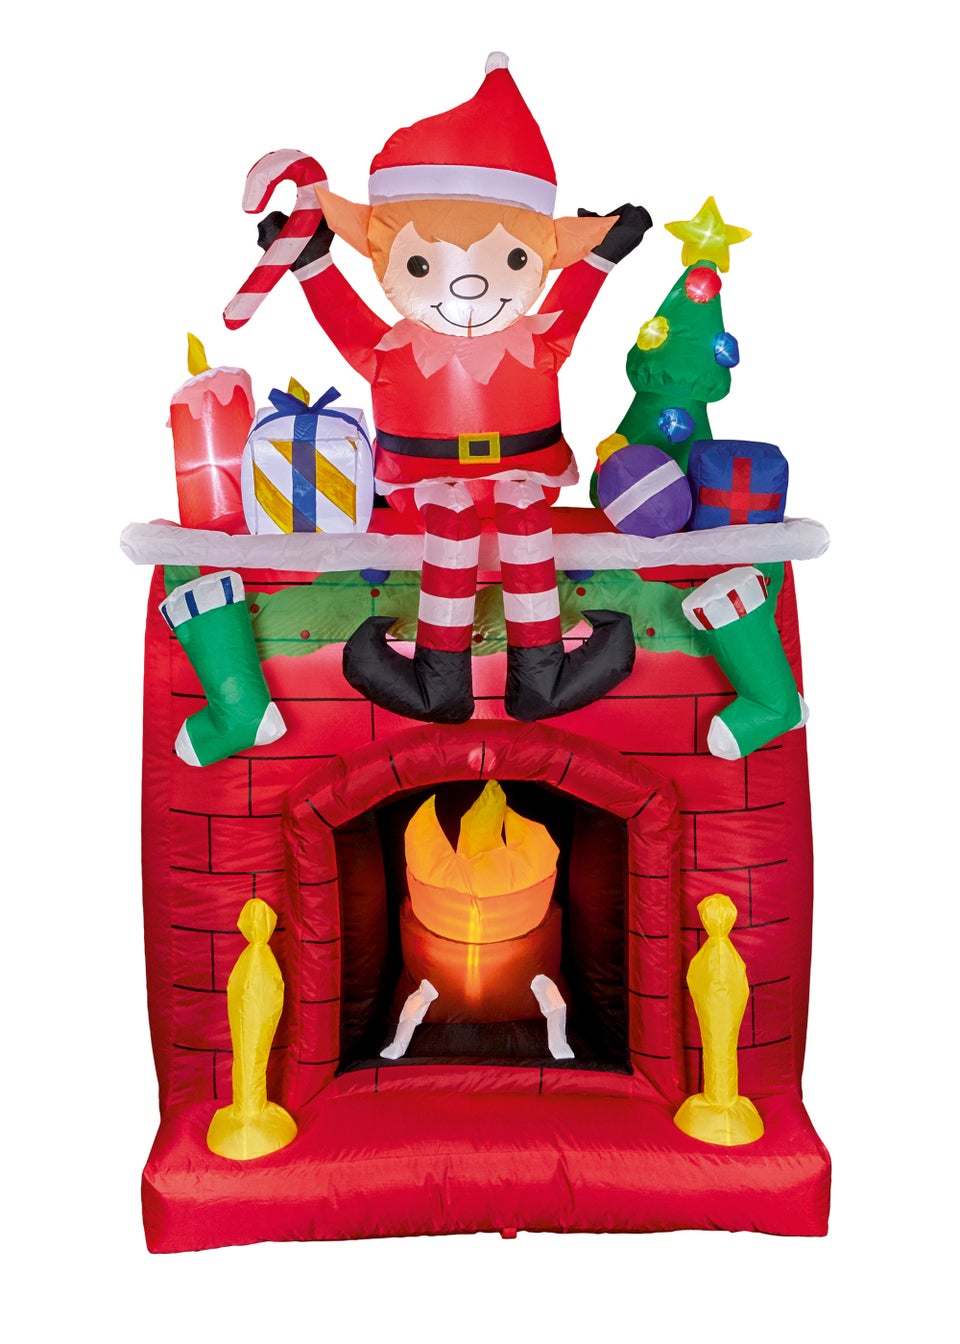 Premier Decorations 2m Lit Inflatable Fireplace with Elf